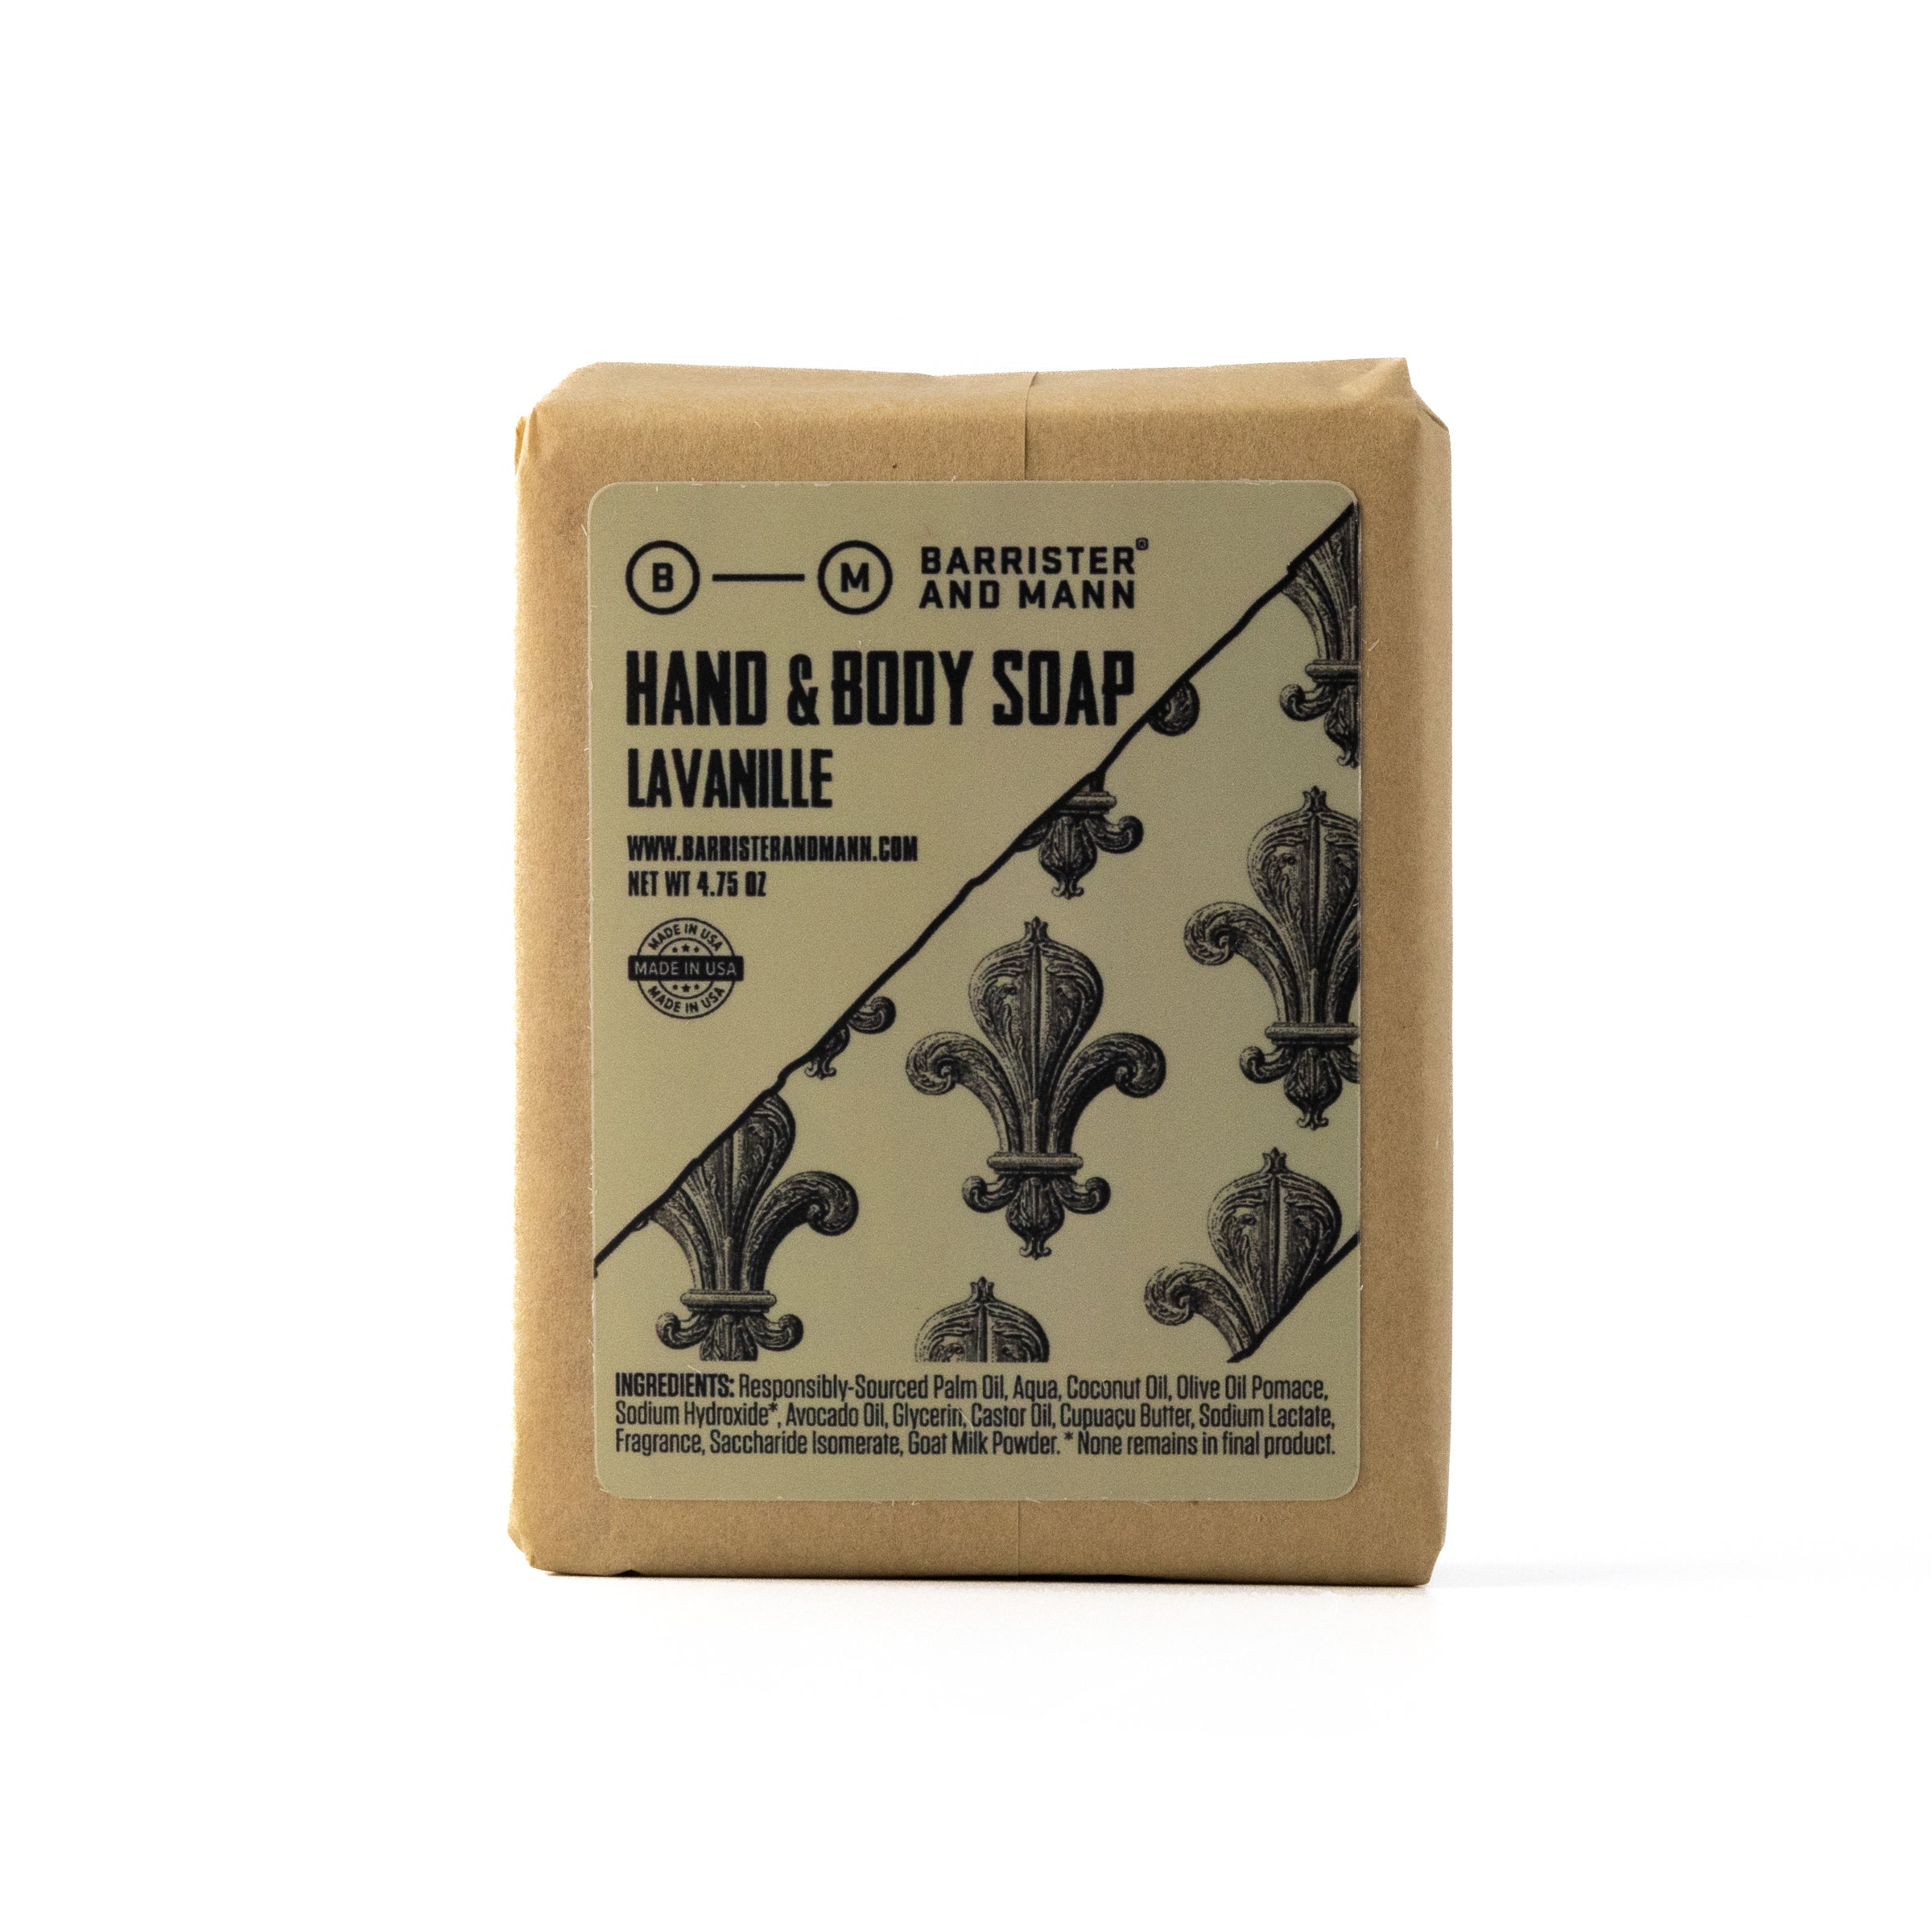 Hand &amp; Body Soap: Lavanille - Barrister and Mann LLC